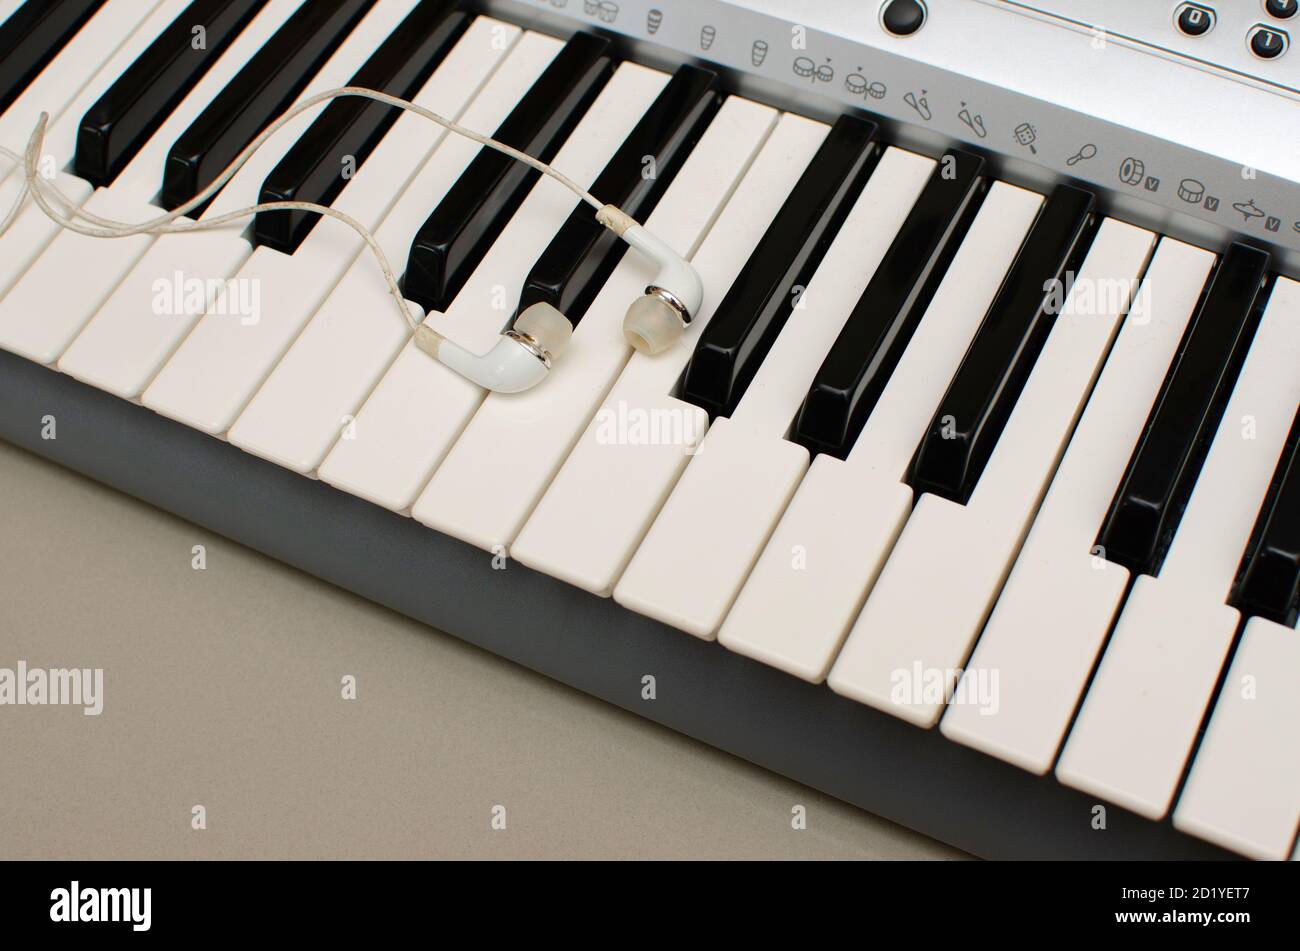 Keyboard  of Synthesiser or Electronic musical instrument with ear buds or ear phones Stock Photo